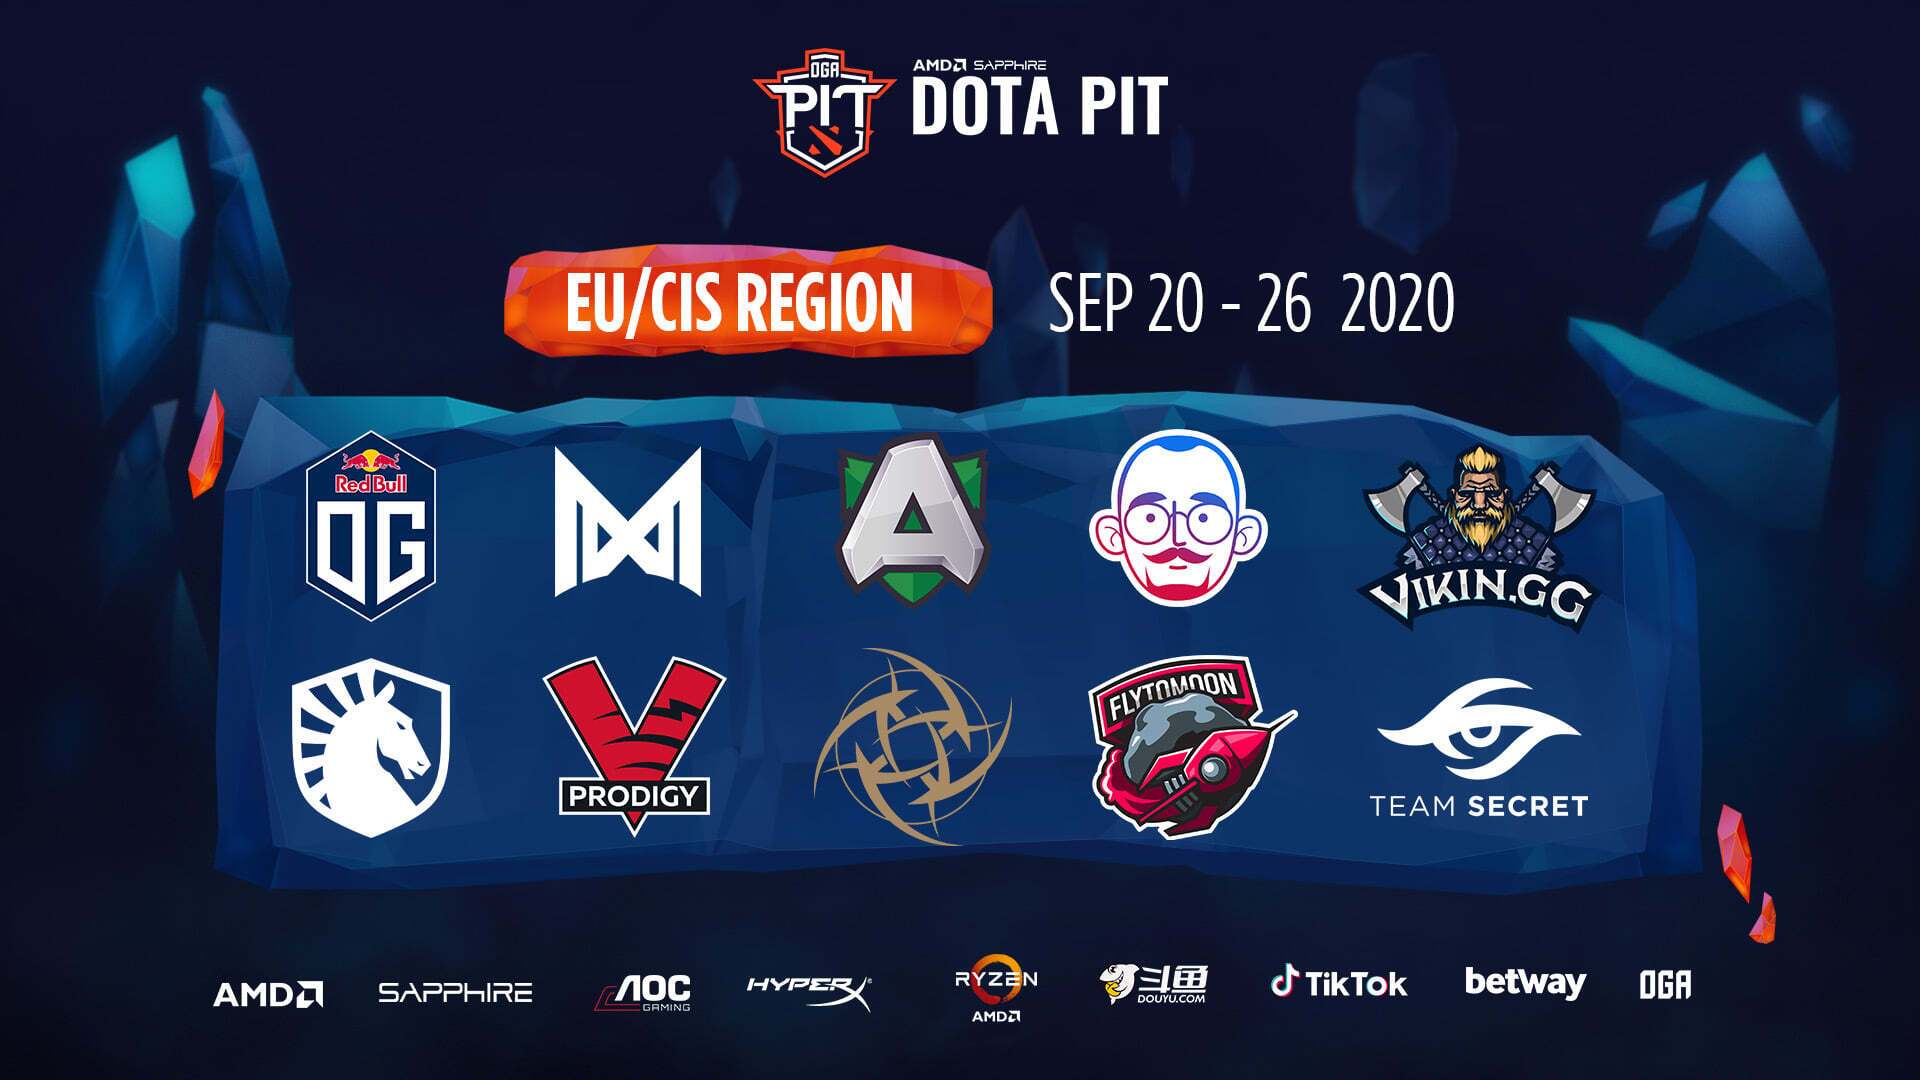 Hot off the success of its previous two seasons, OGA Dota PIT returns for its most stacked tournament yet (Image via Dota PIT)